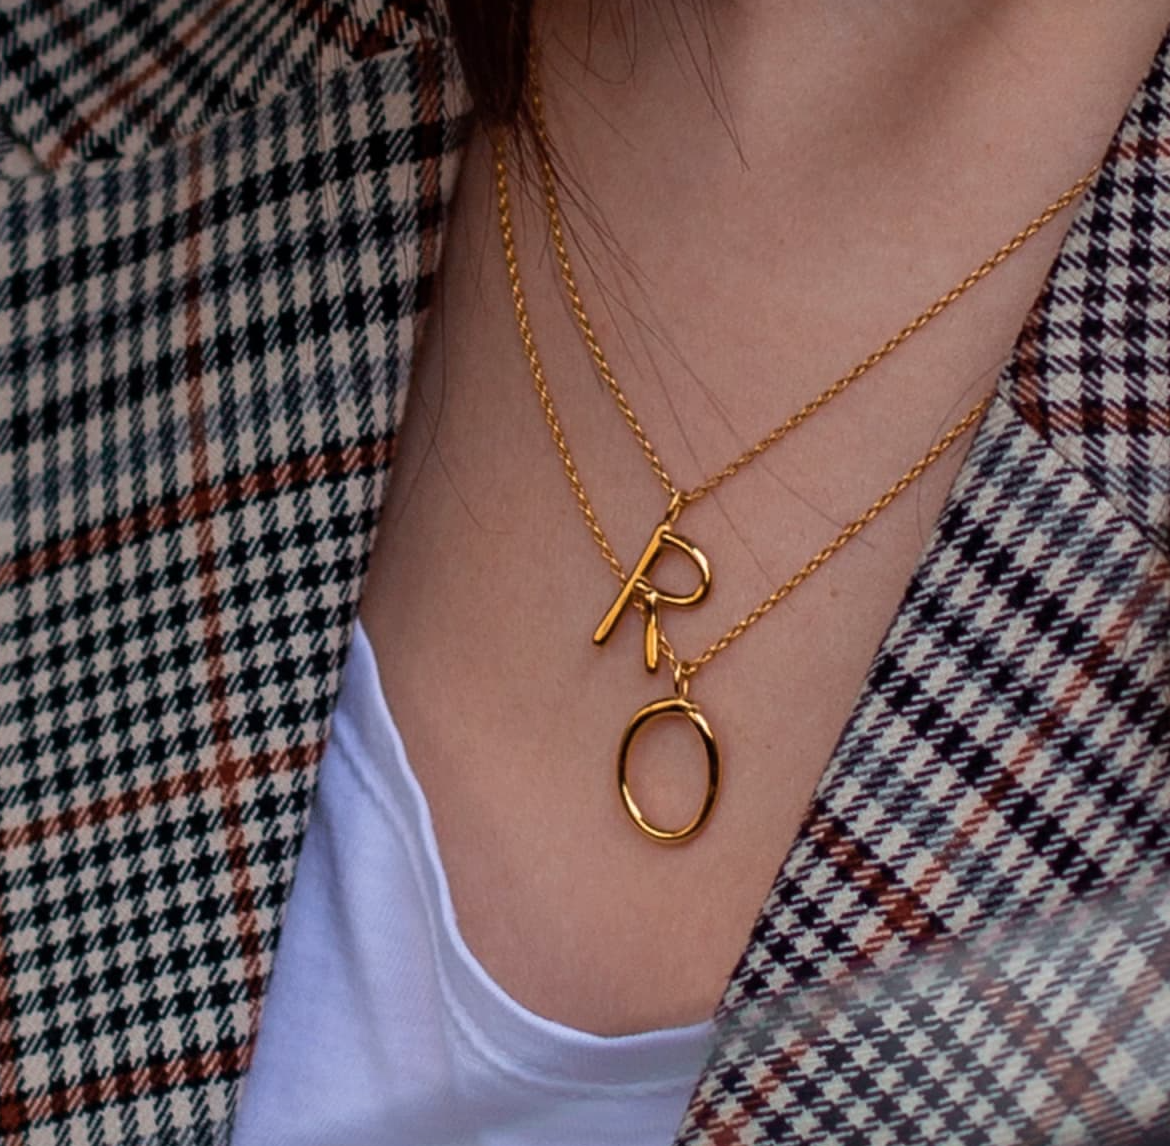 Initial D Necklace Adjustable 41-46cm/16-18' in 18k Gold Vermeil on  Sterling Silver | Jewellery by Monica Vinader